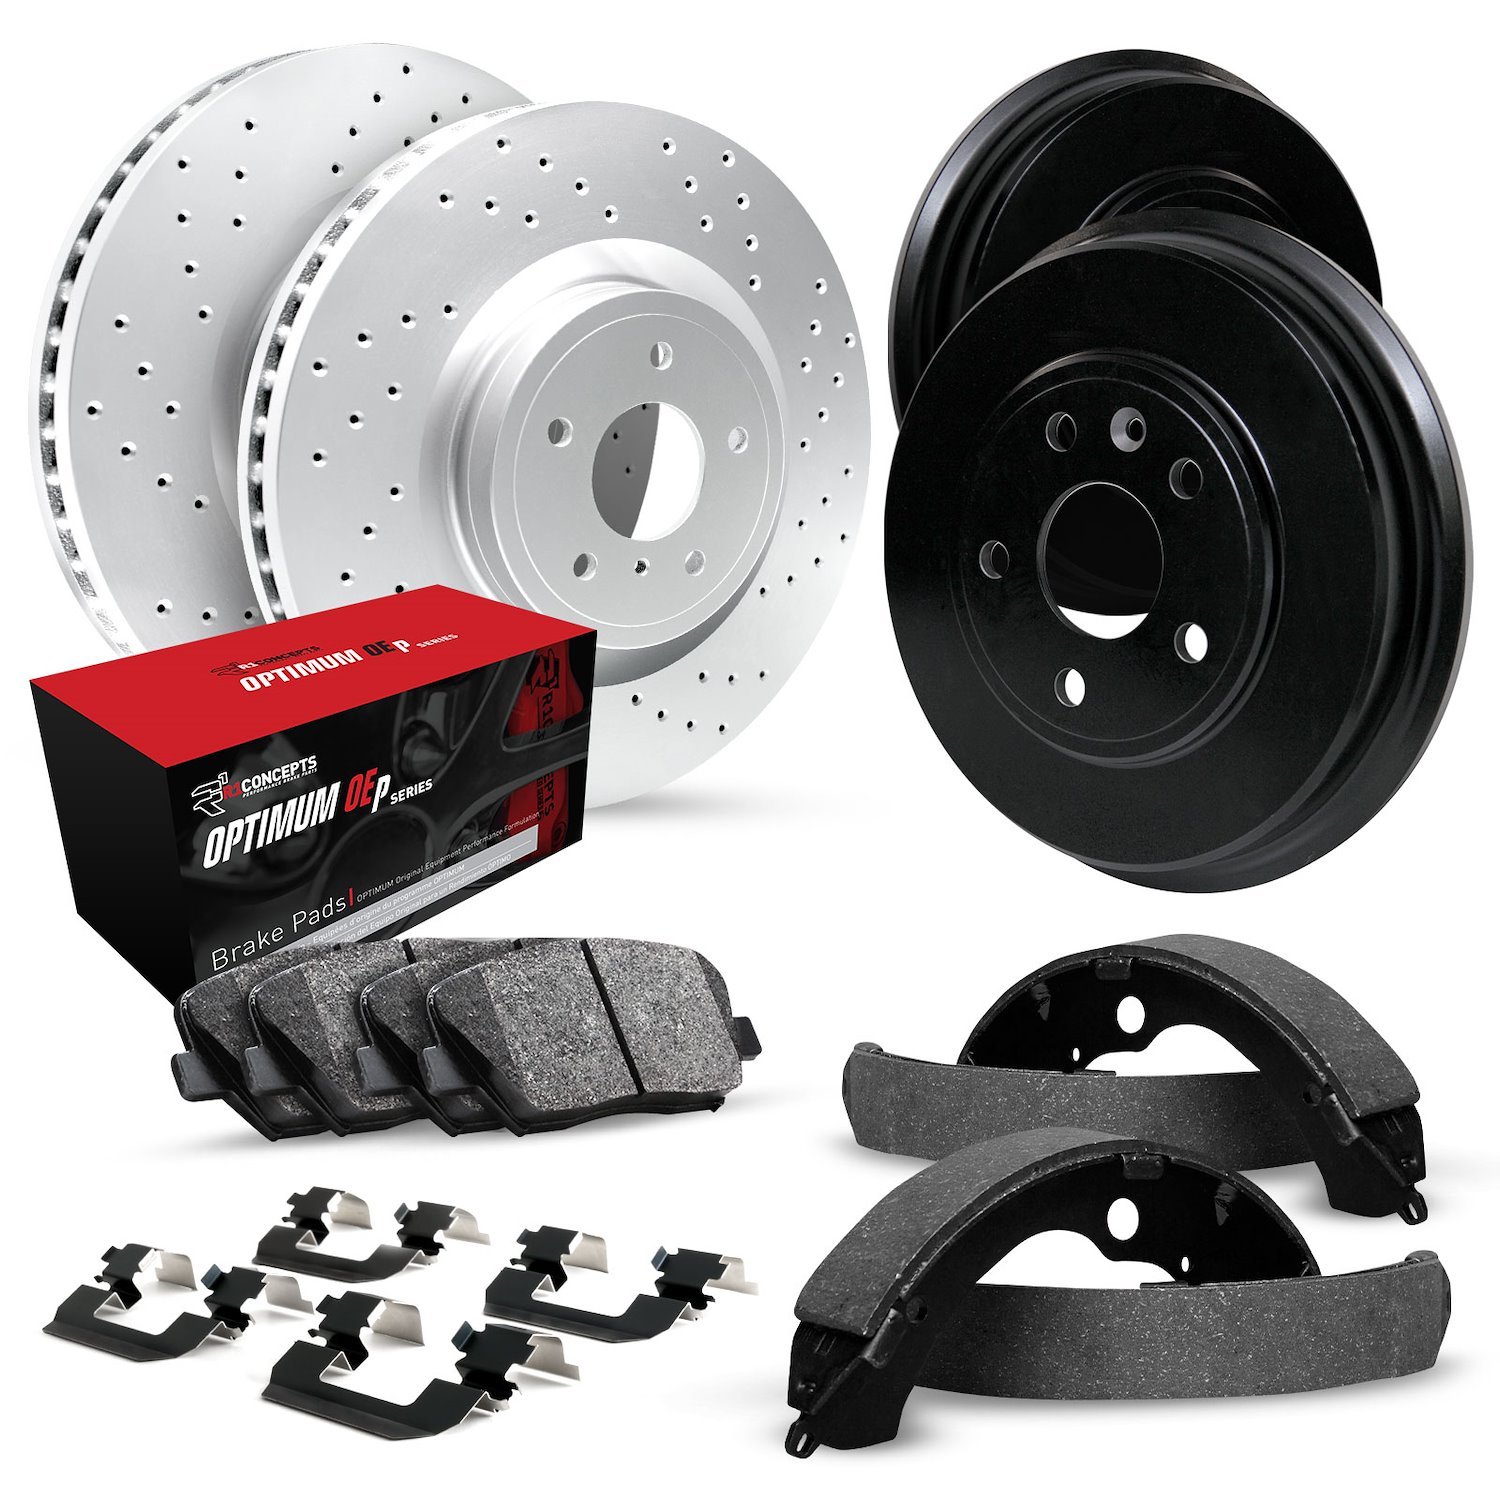 GEO-Carbon Drilled Brake Rotor & Drum Set w/Optimum OE Pads, Shoes, & Hardware, 1992-2002 GM, Position: Front & Rear